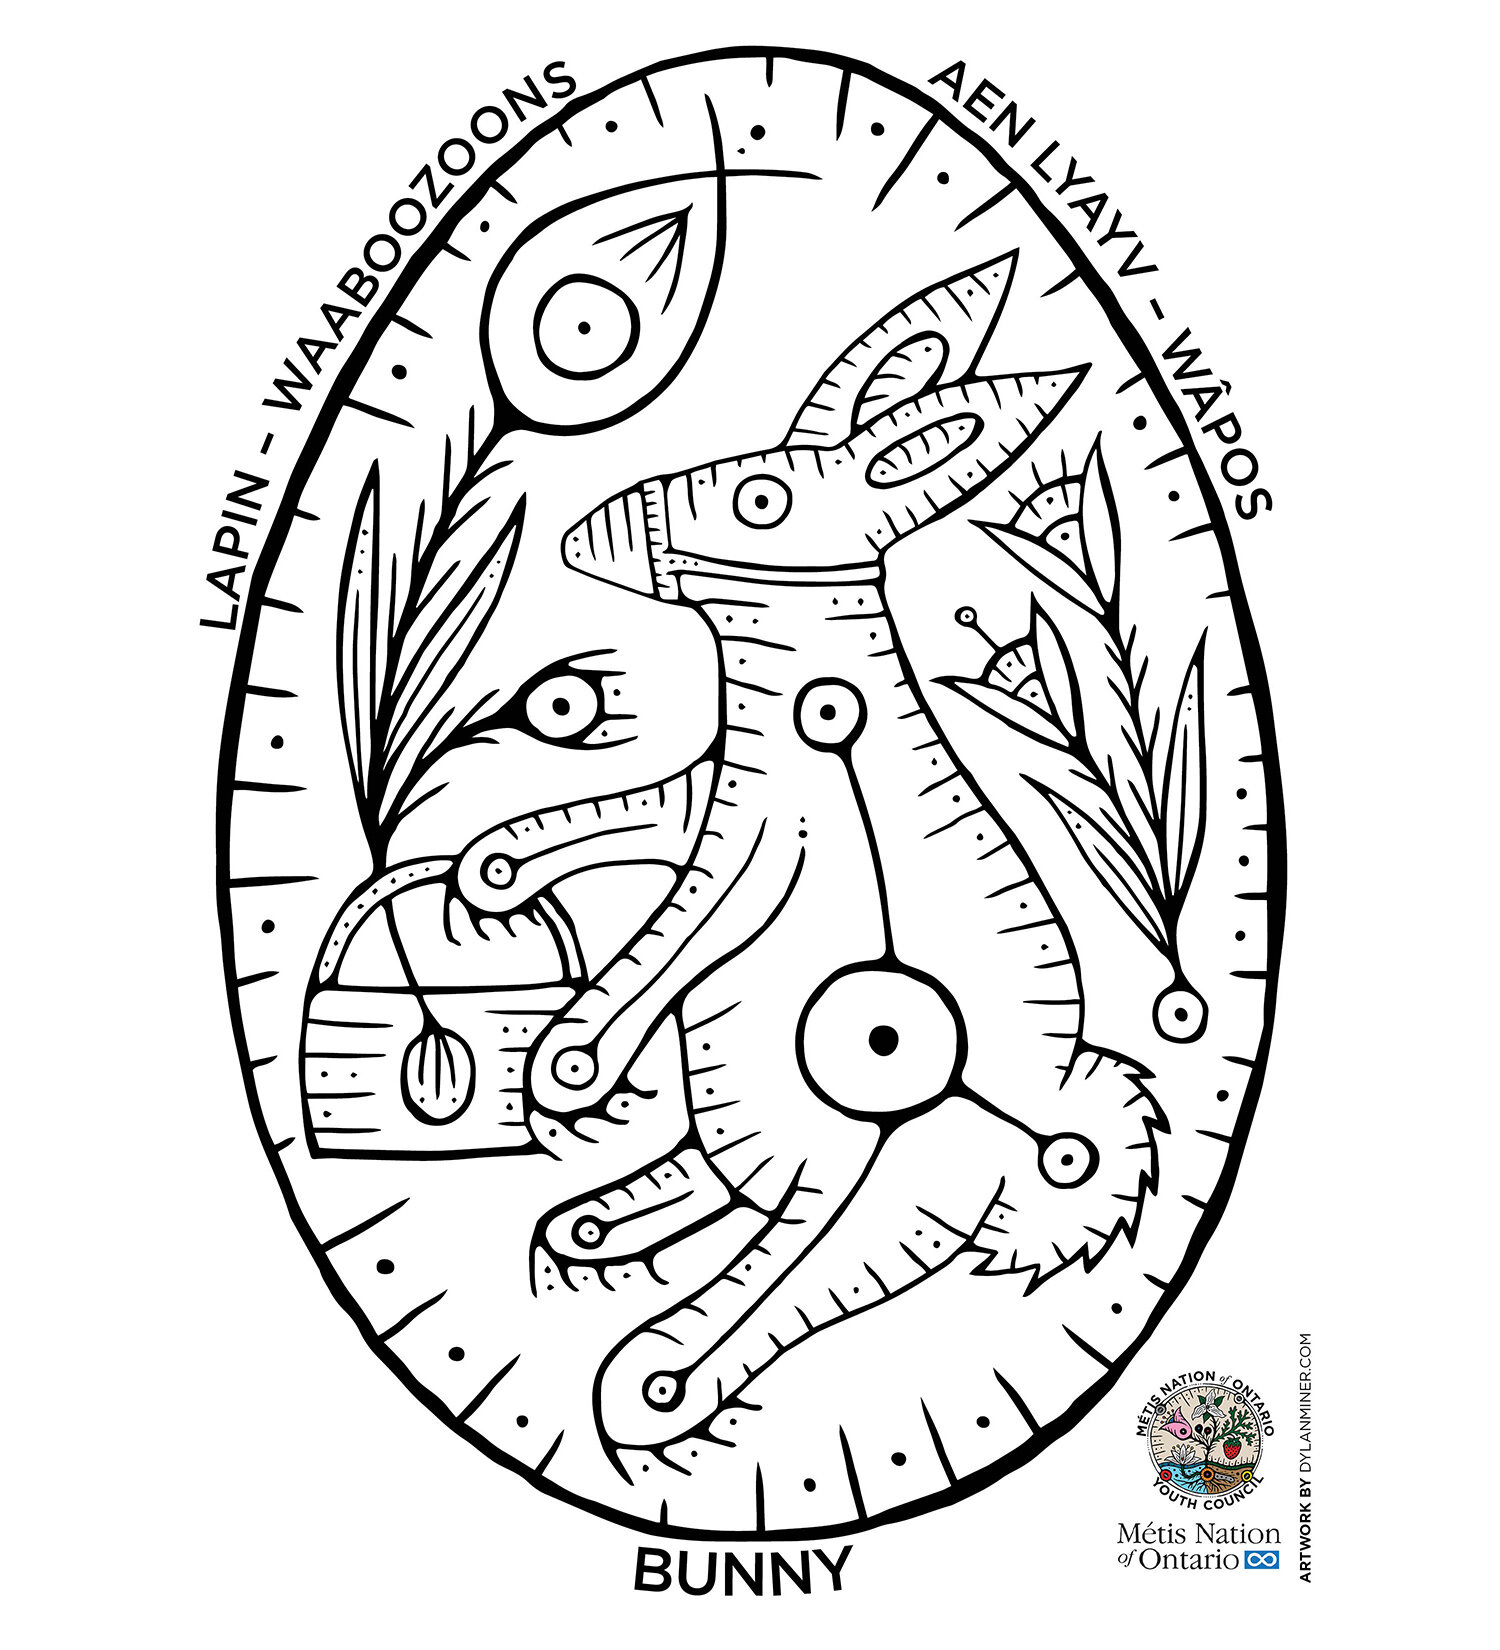 BUNNY COLORING PAGES — Dylan Miner